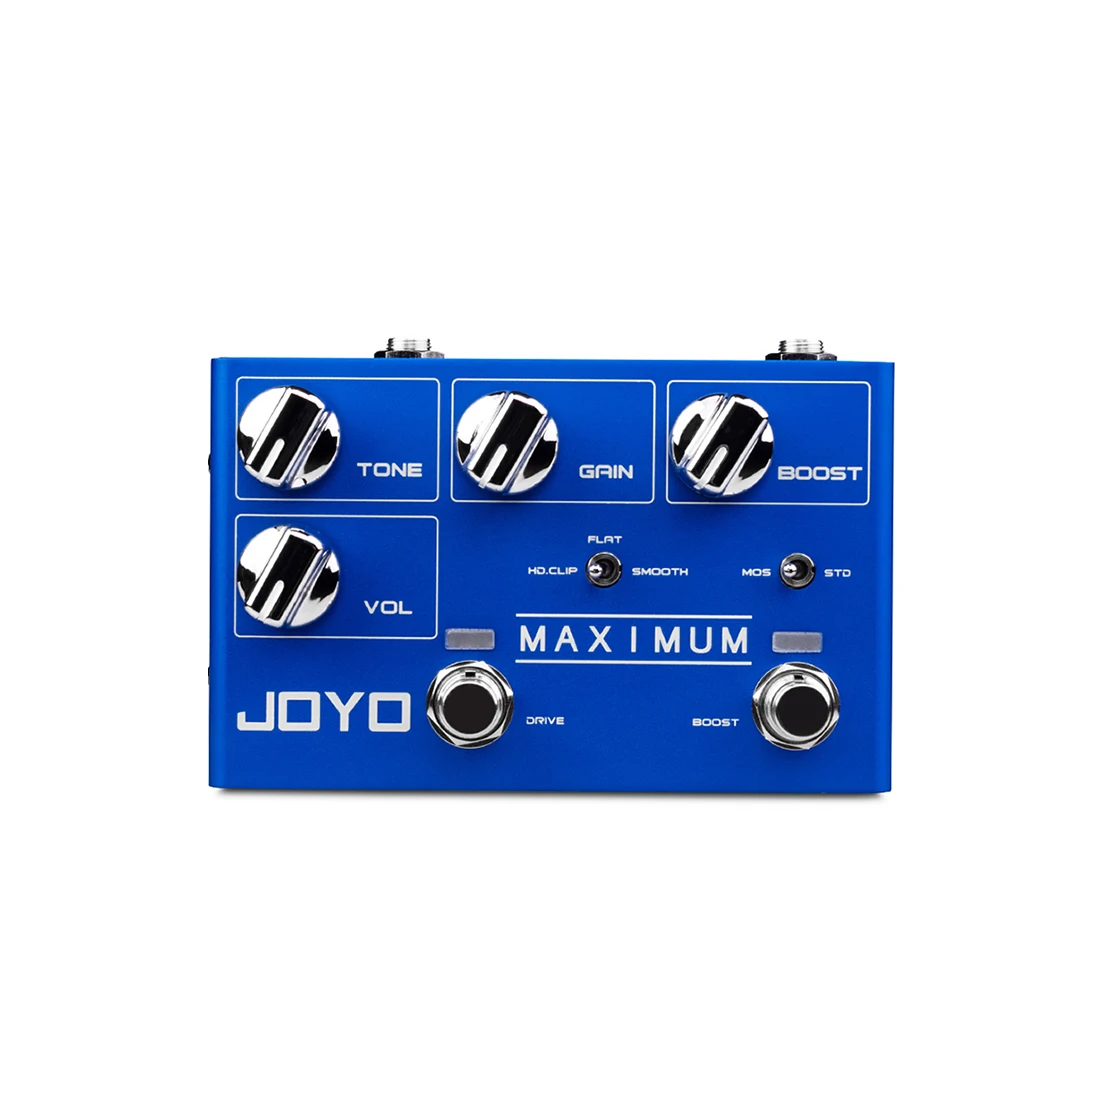 

JOYO R-05 MAXIMUM electric Guitar Overdrive Effect Clean Tone Without Compression Wild Long Sustain Guitar Player Solo Pedal